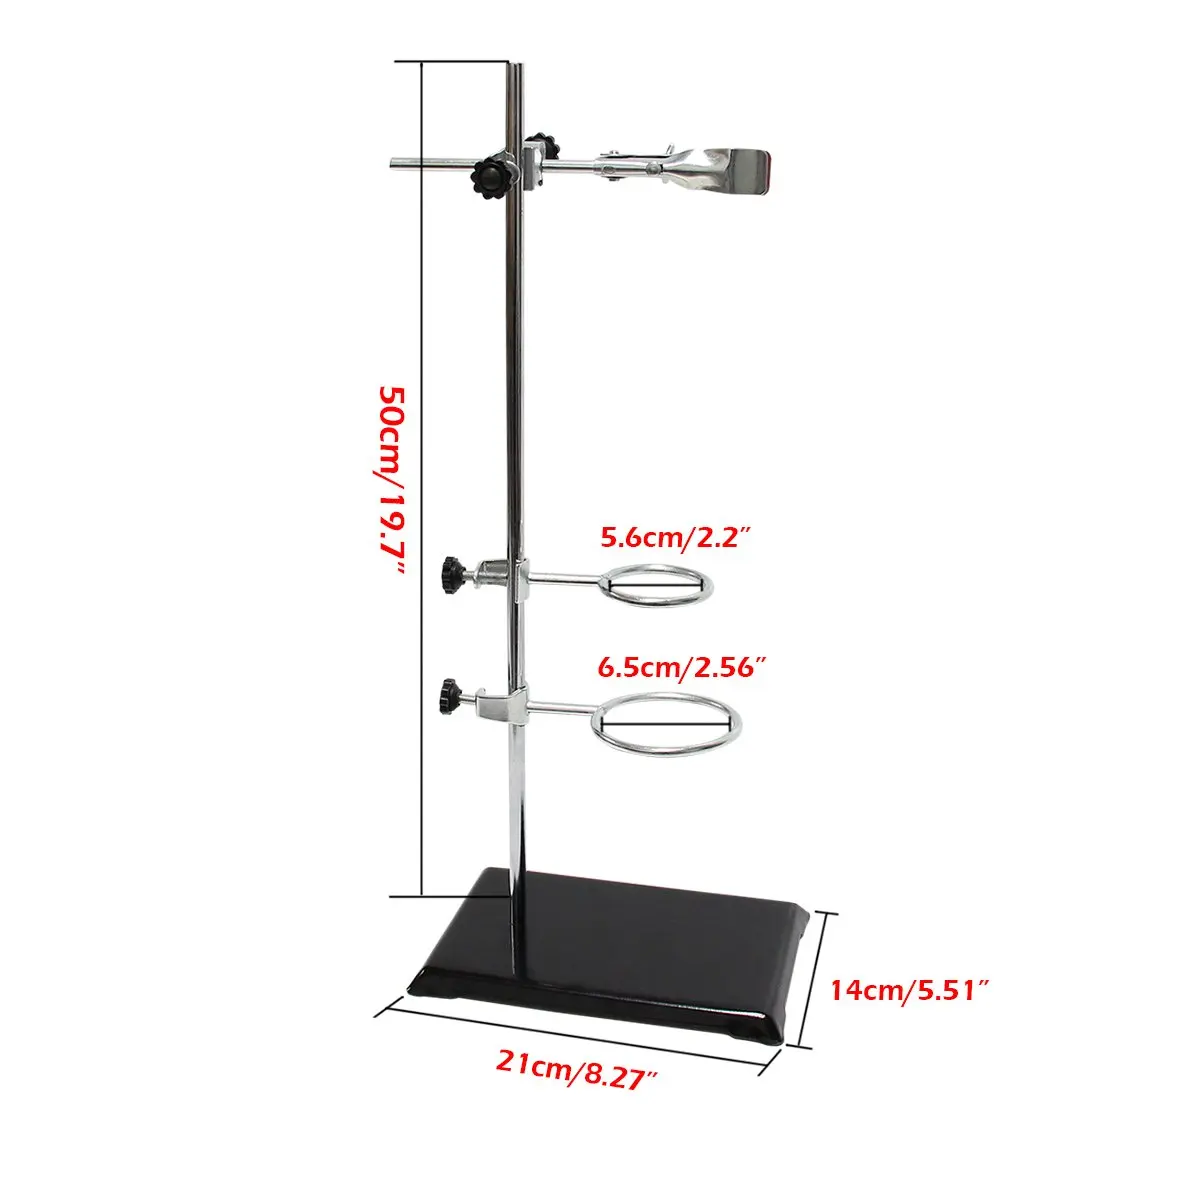 buret clamp and stand